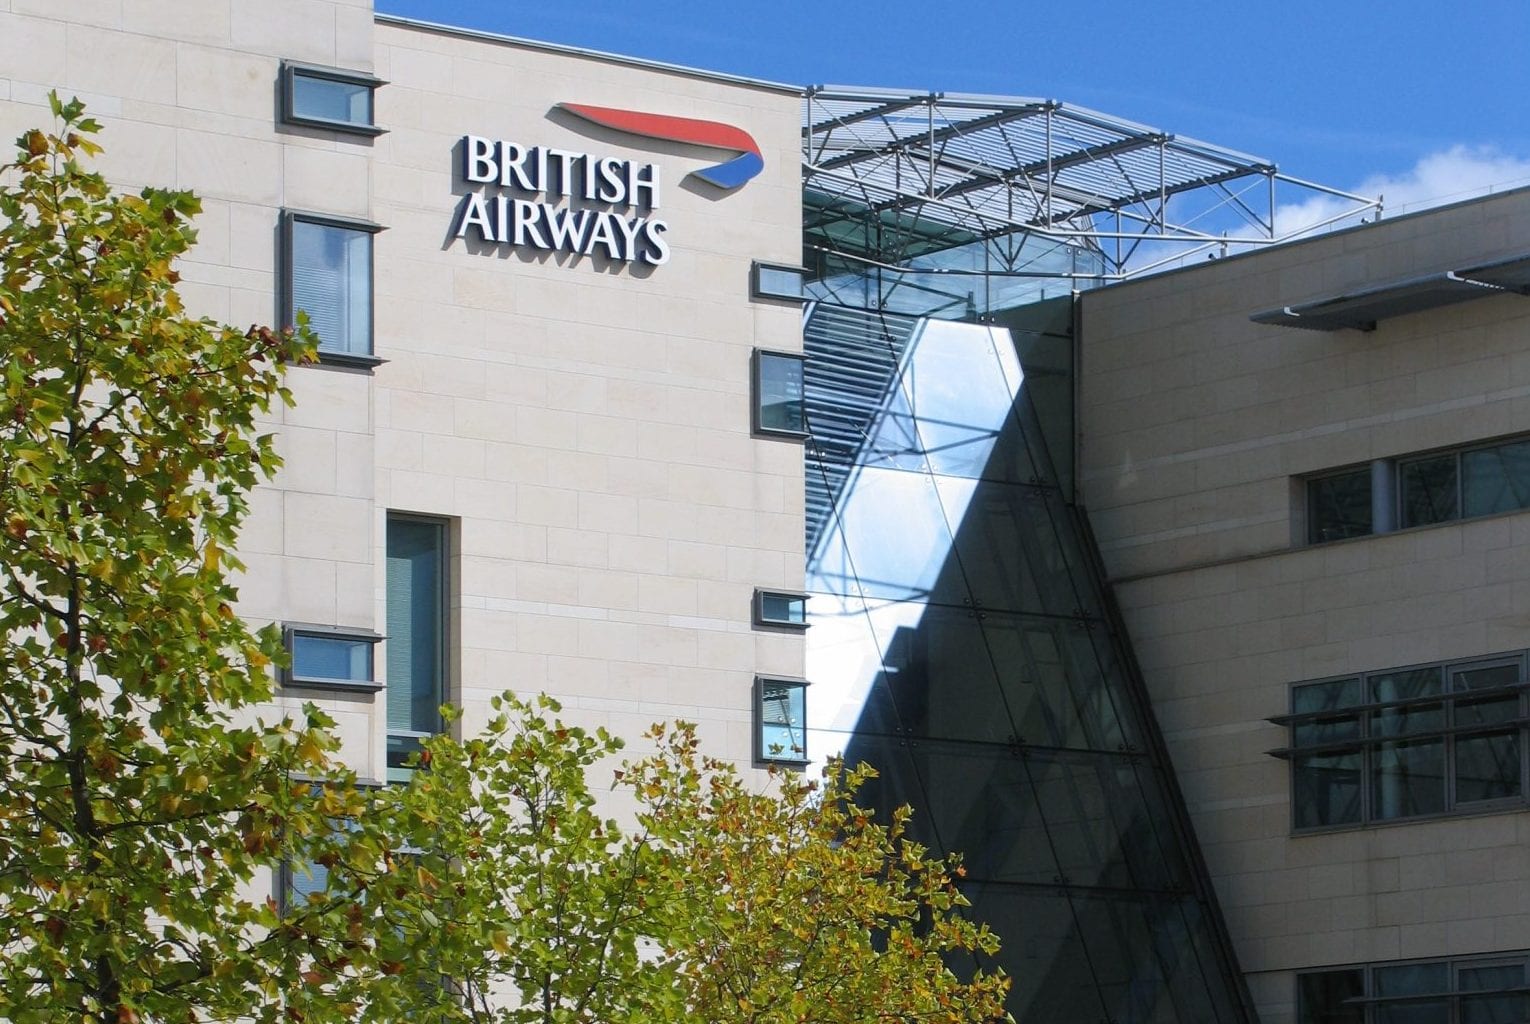 British Airways is considering selling its UK headquarters, located next to Heathrow Airport.